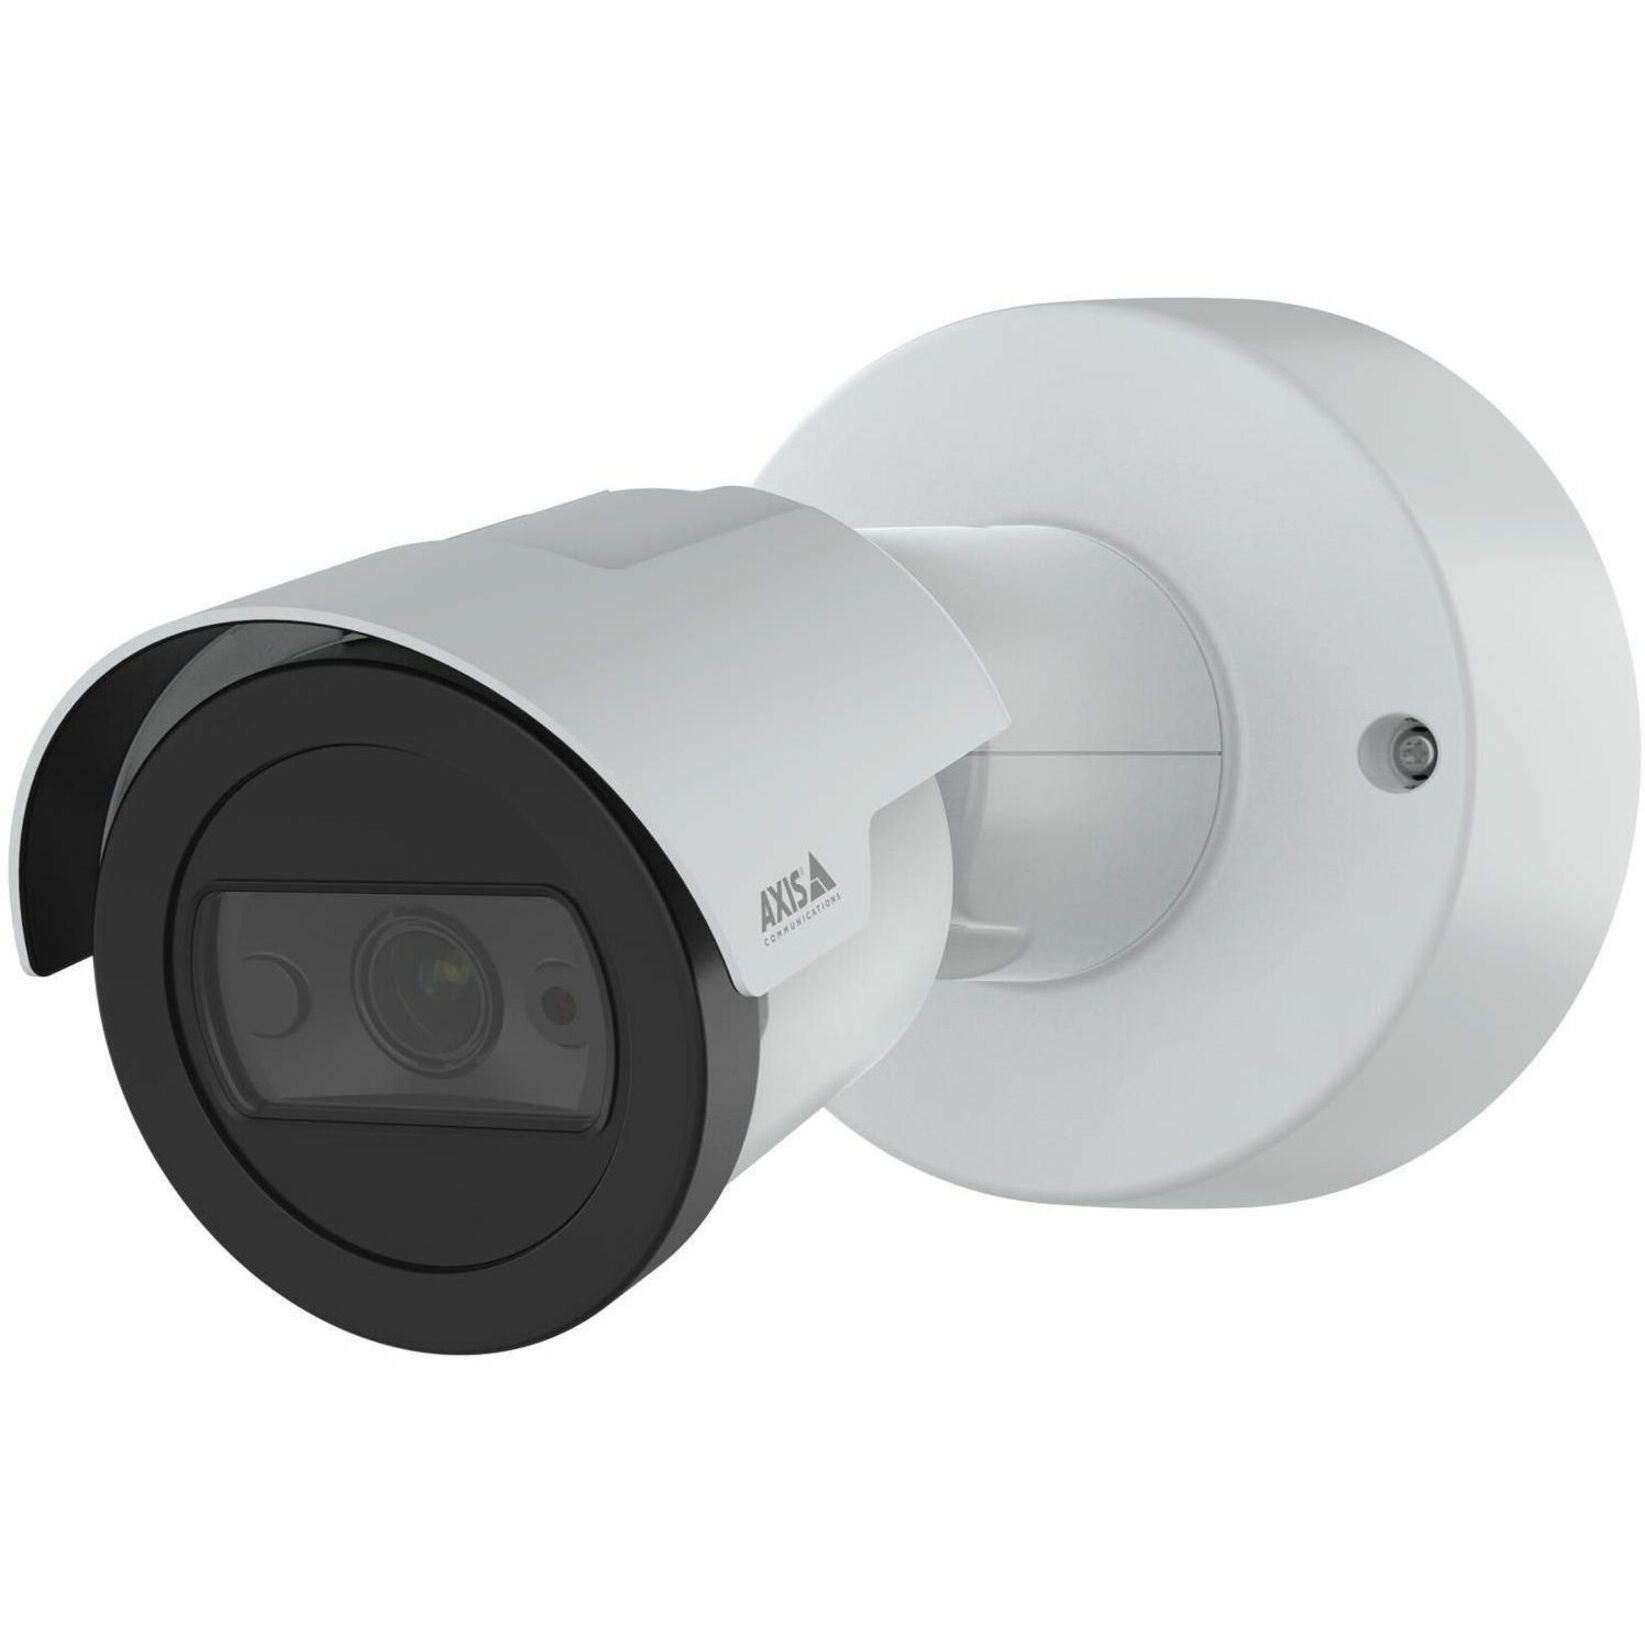 AXIS 02124-001 M2035-LE Network Camera, Outdoor Full HD Color, Remote Management